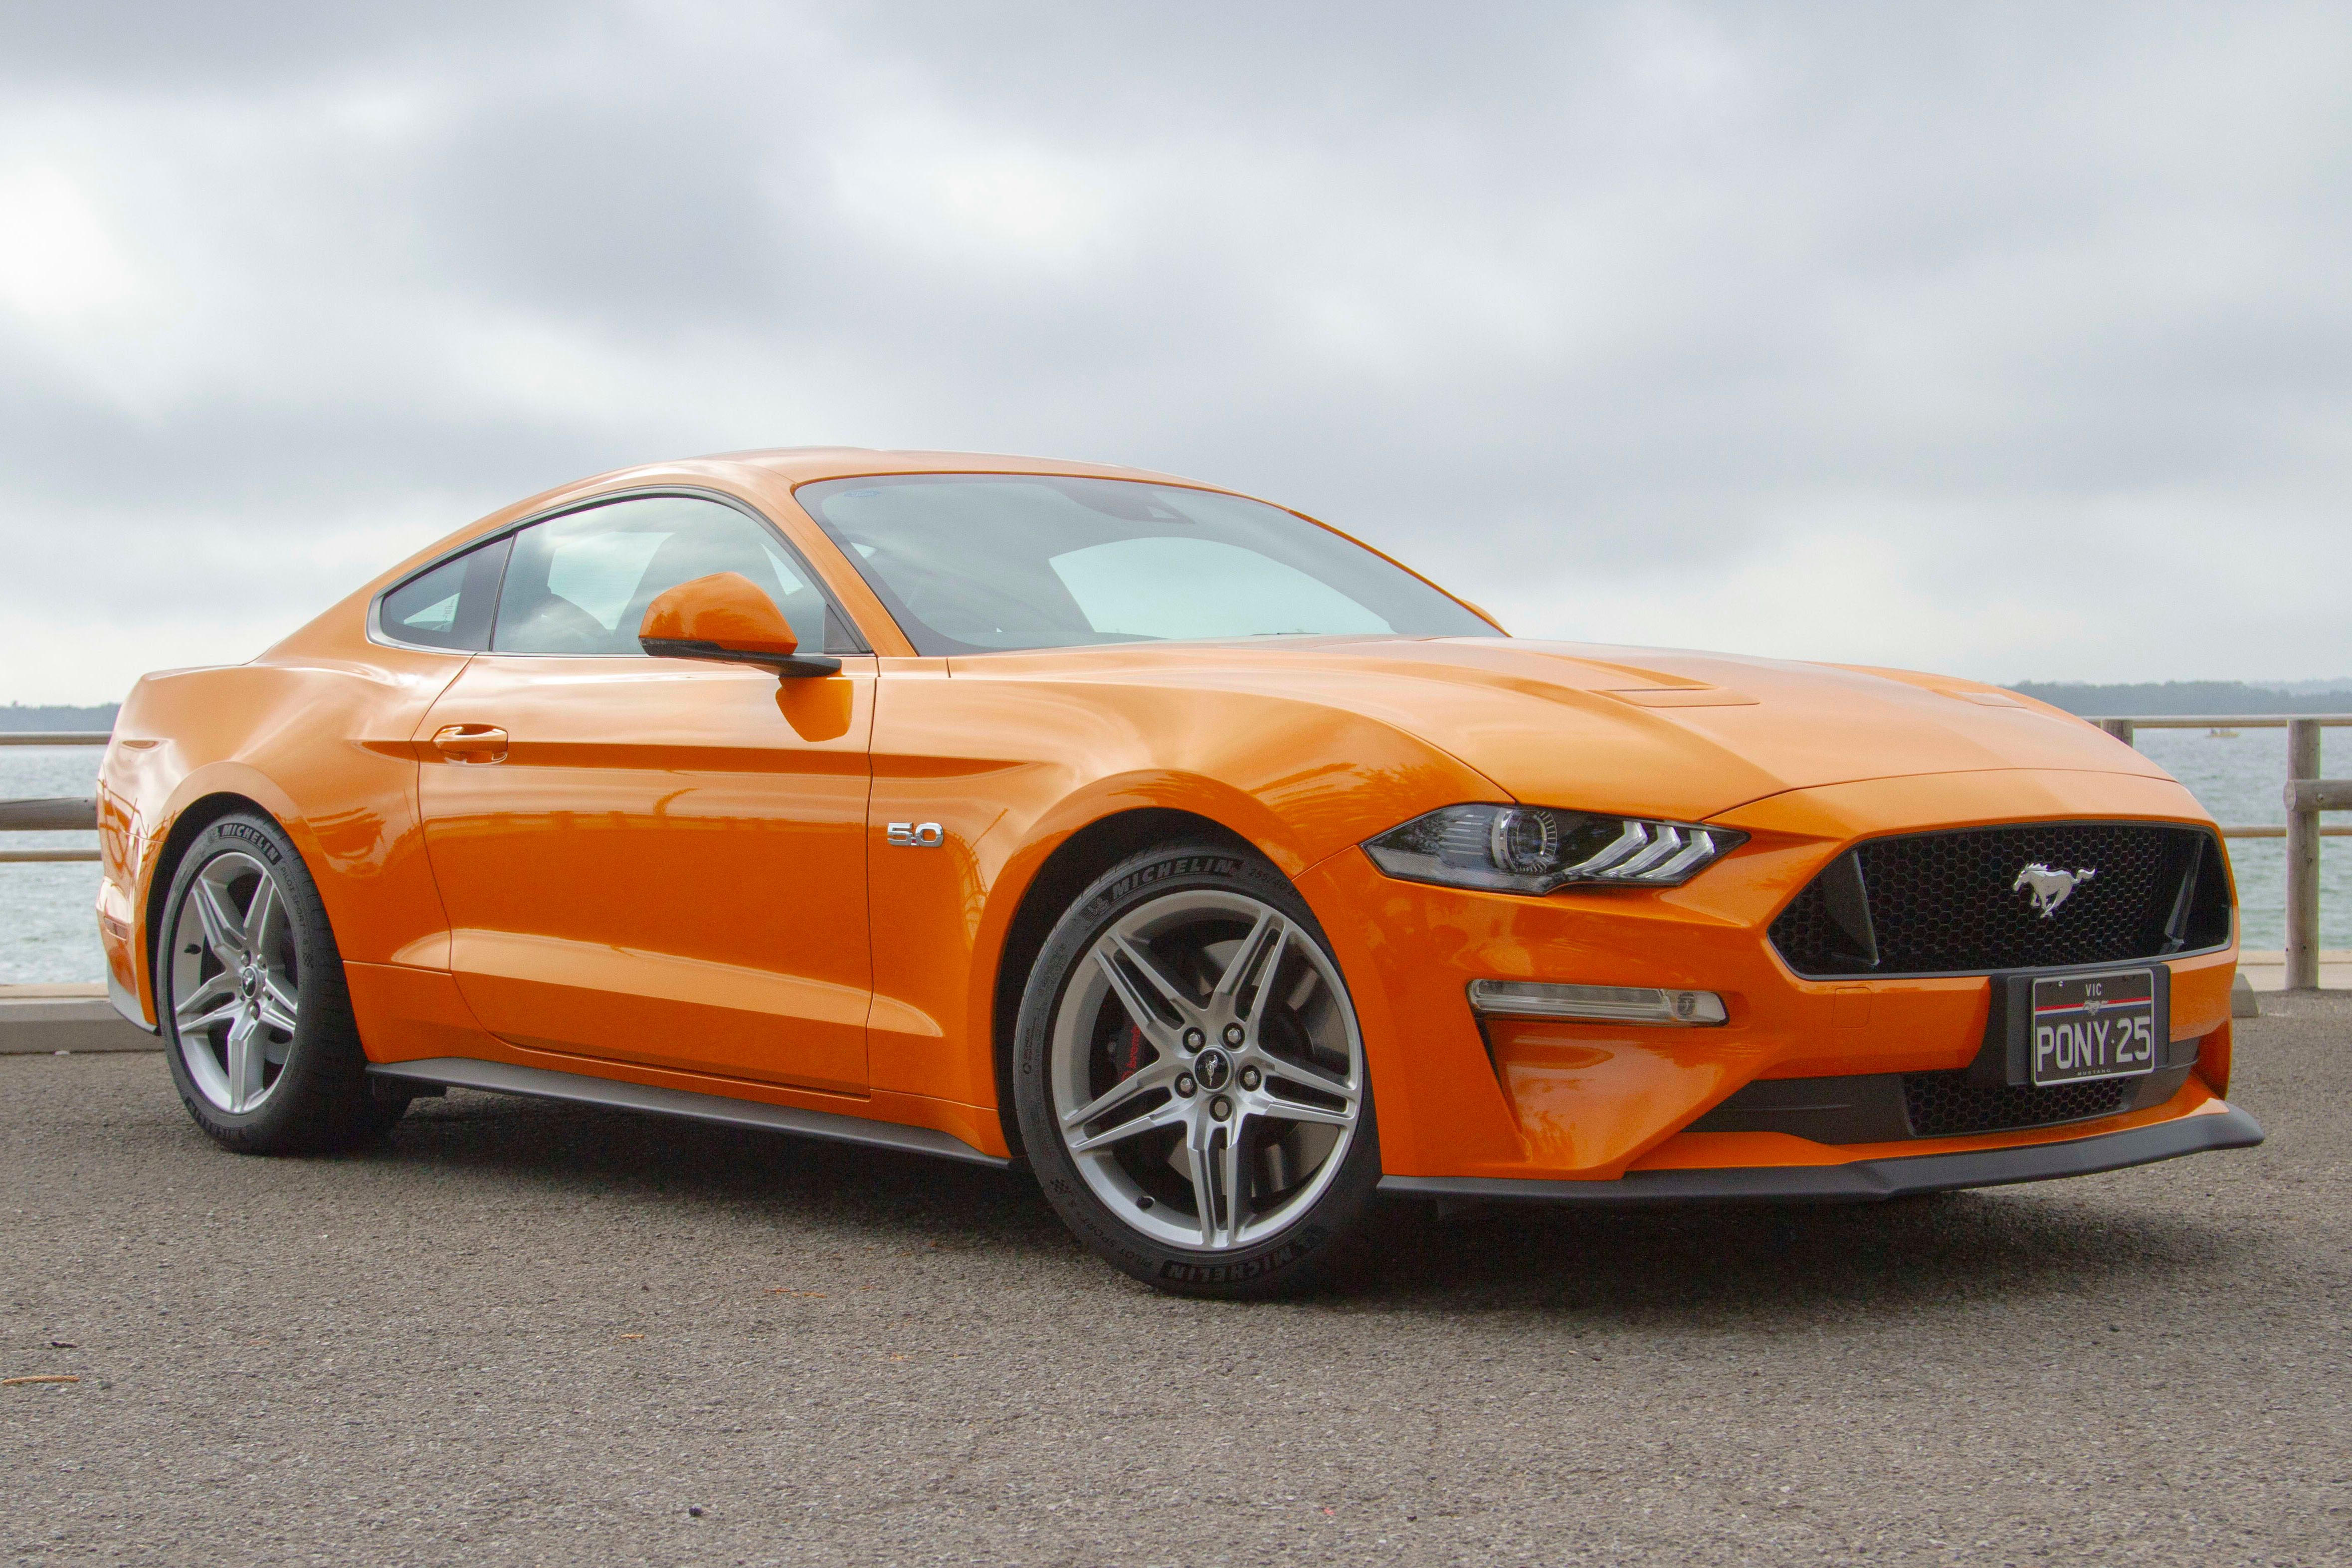 2019 Ford Mustang GT: The iconic muscle car that is known world wide.